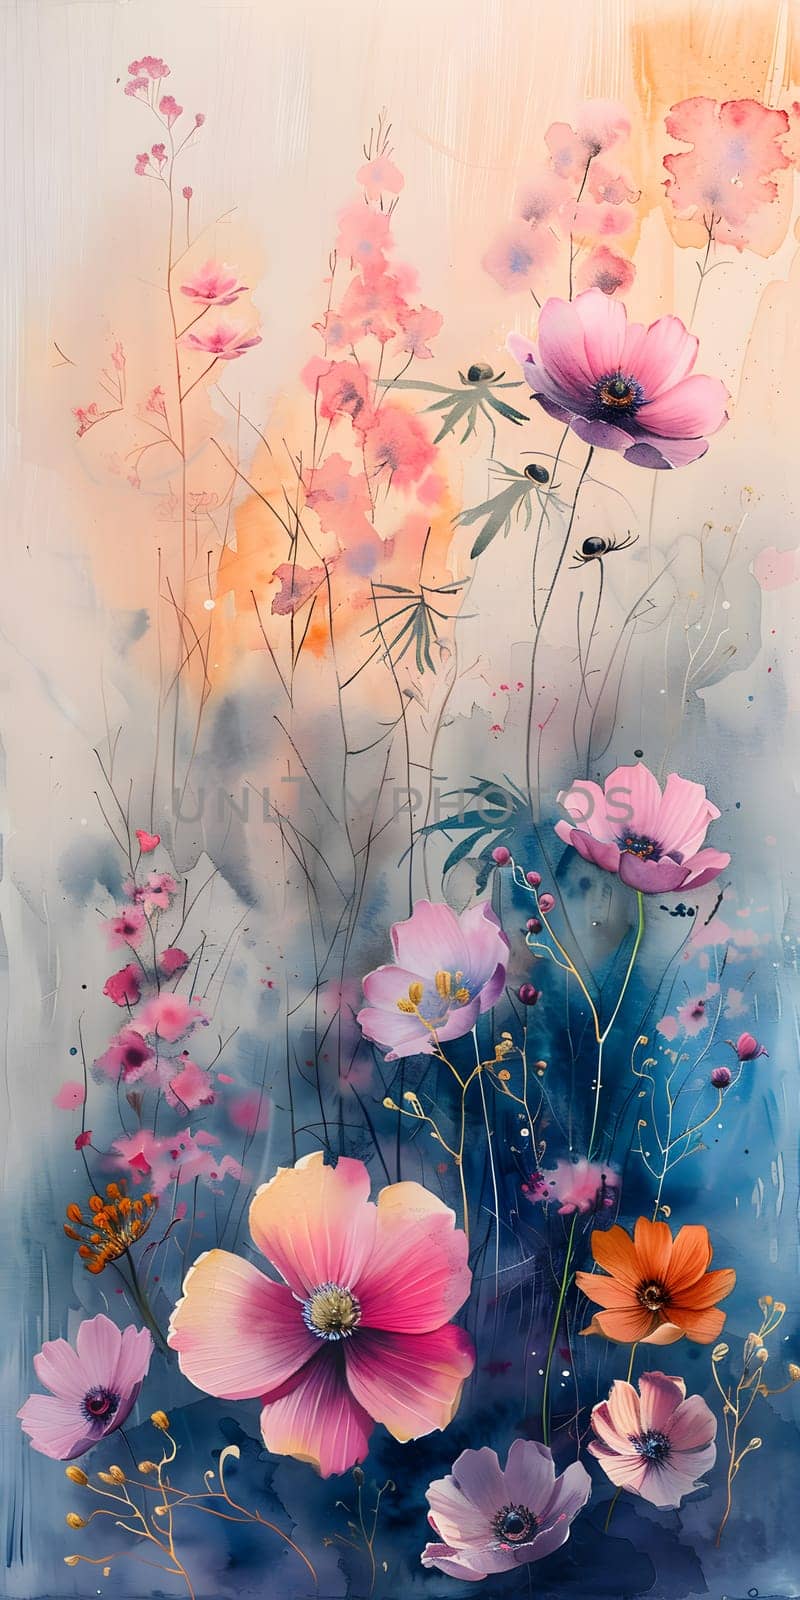 A creative arts painting of pink flowers on a blue background by Nadtochiy